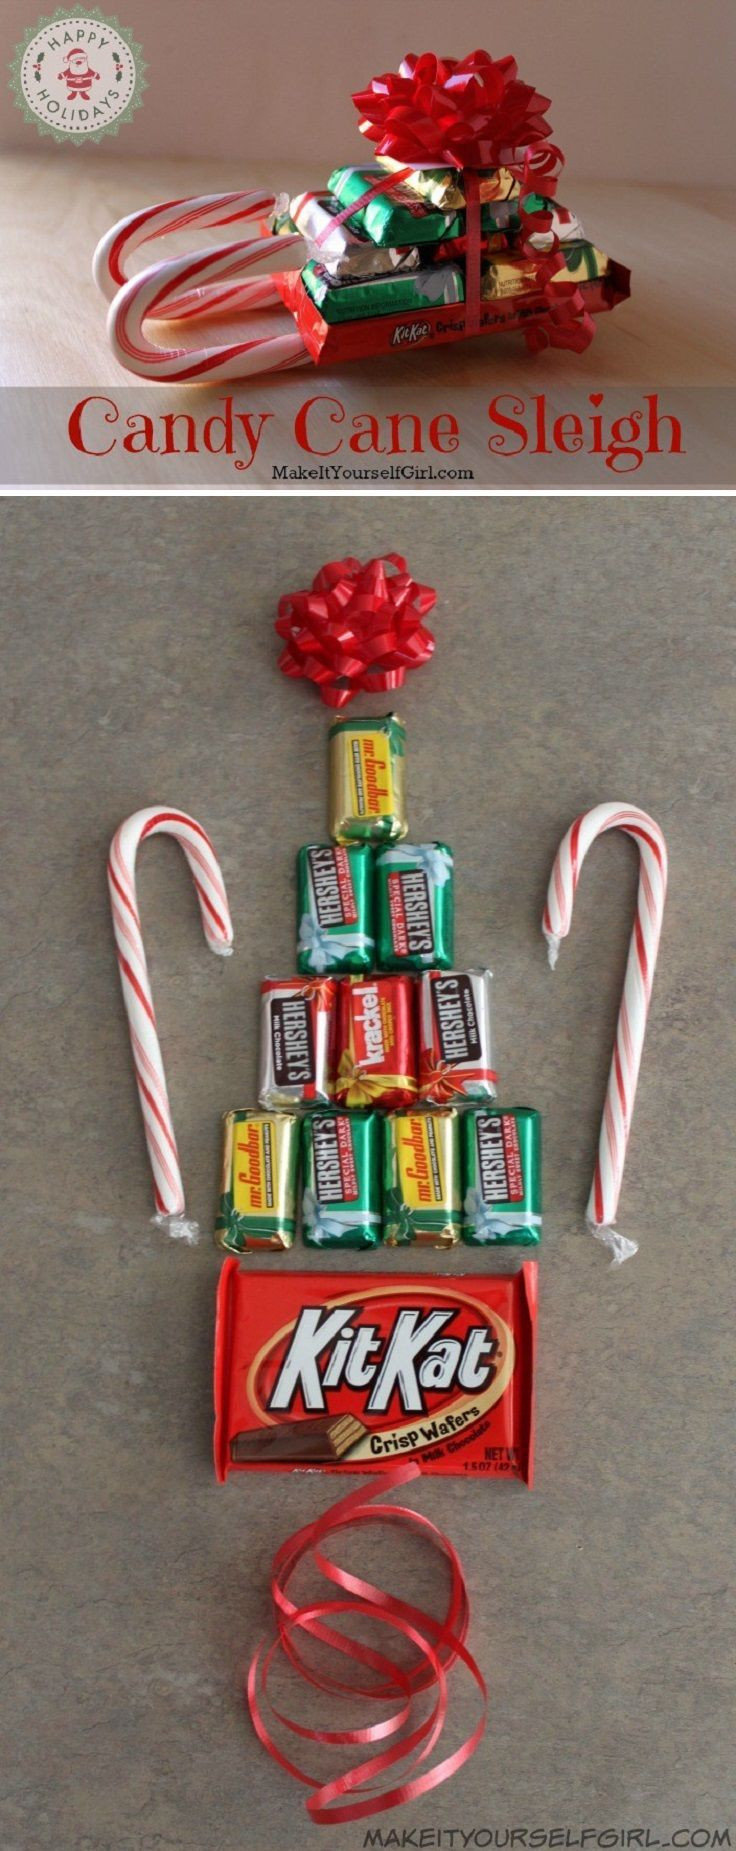 Christmas Candy Crafts
 Best 25 Christmas party favors ideas on Pinterest